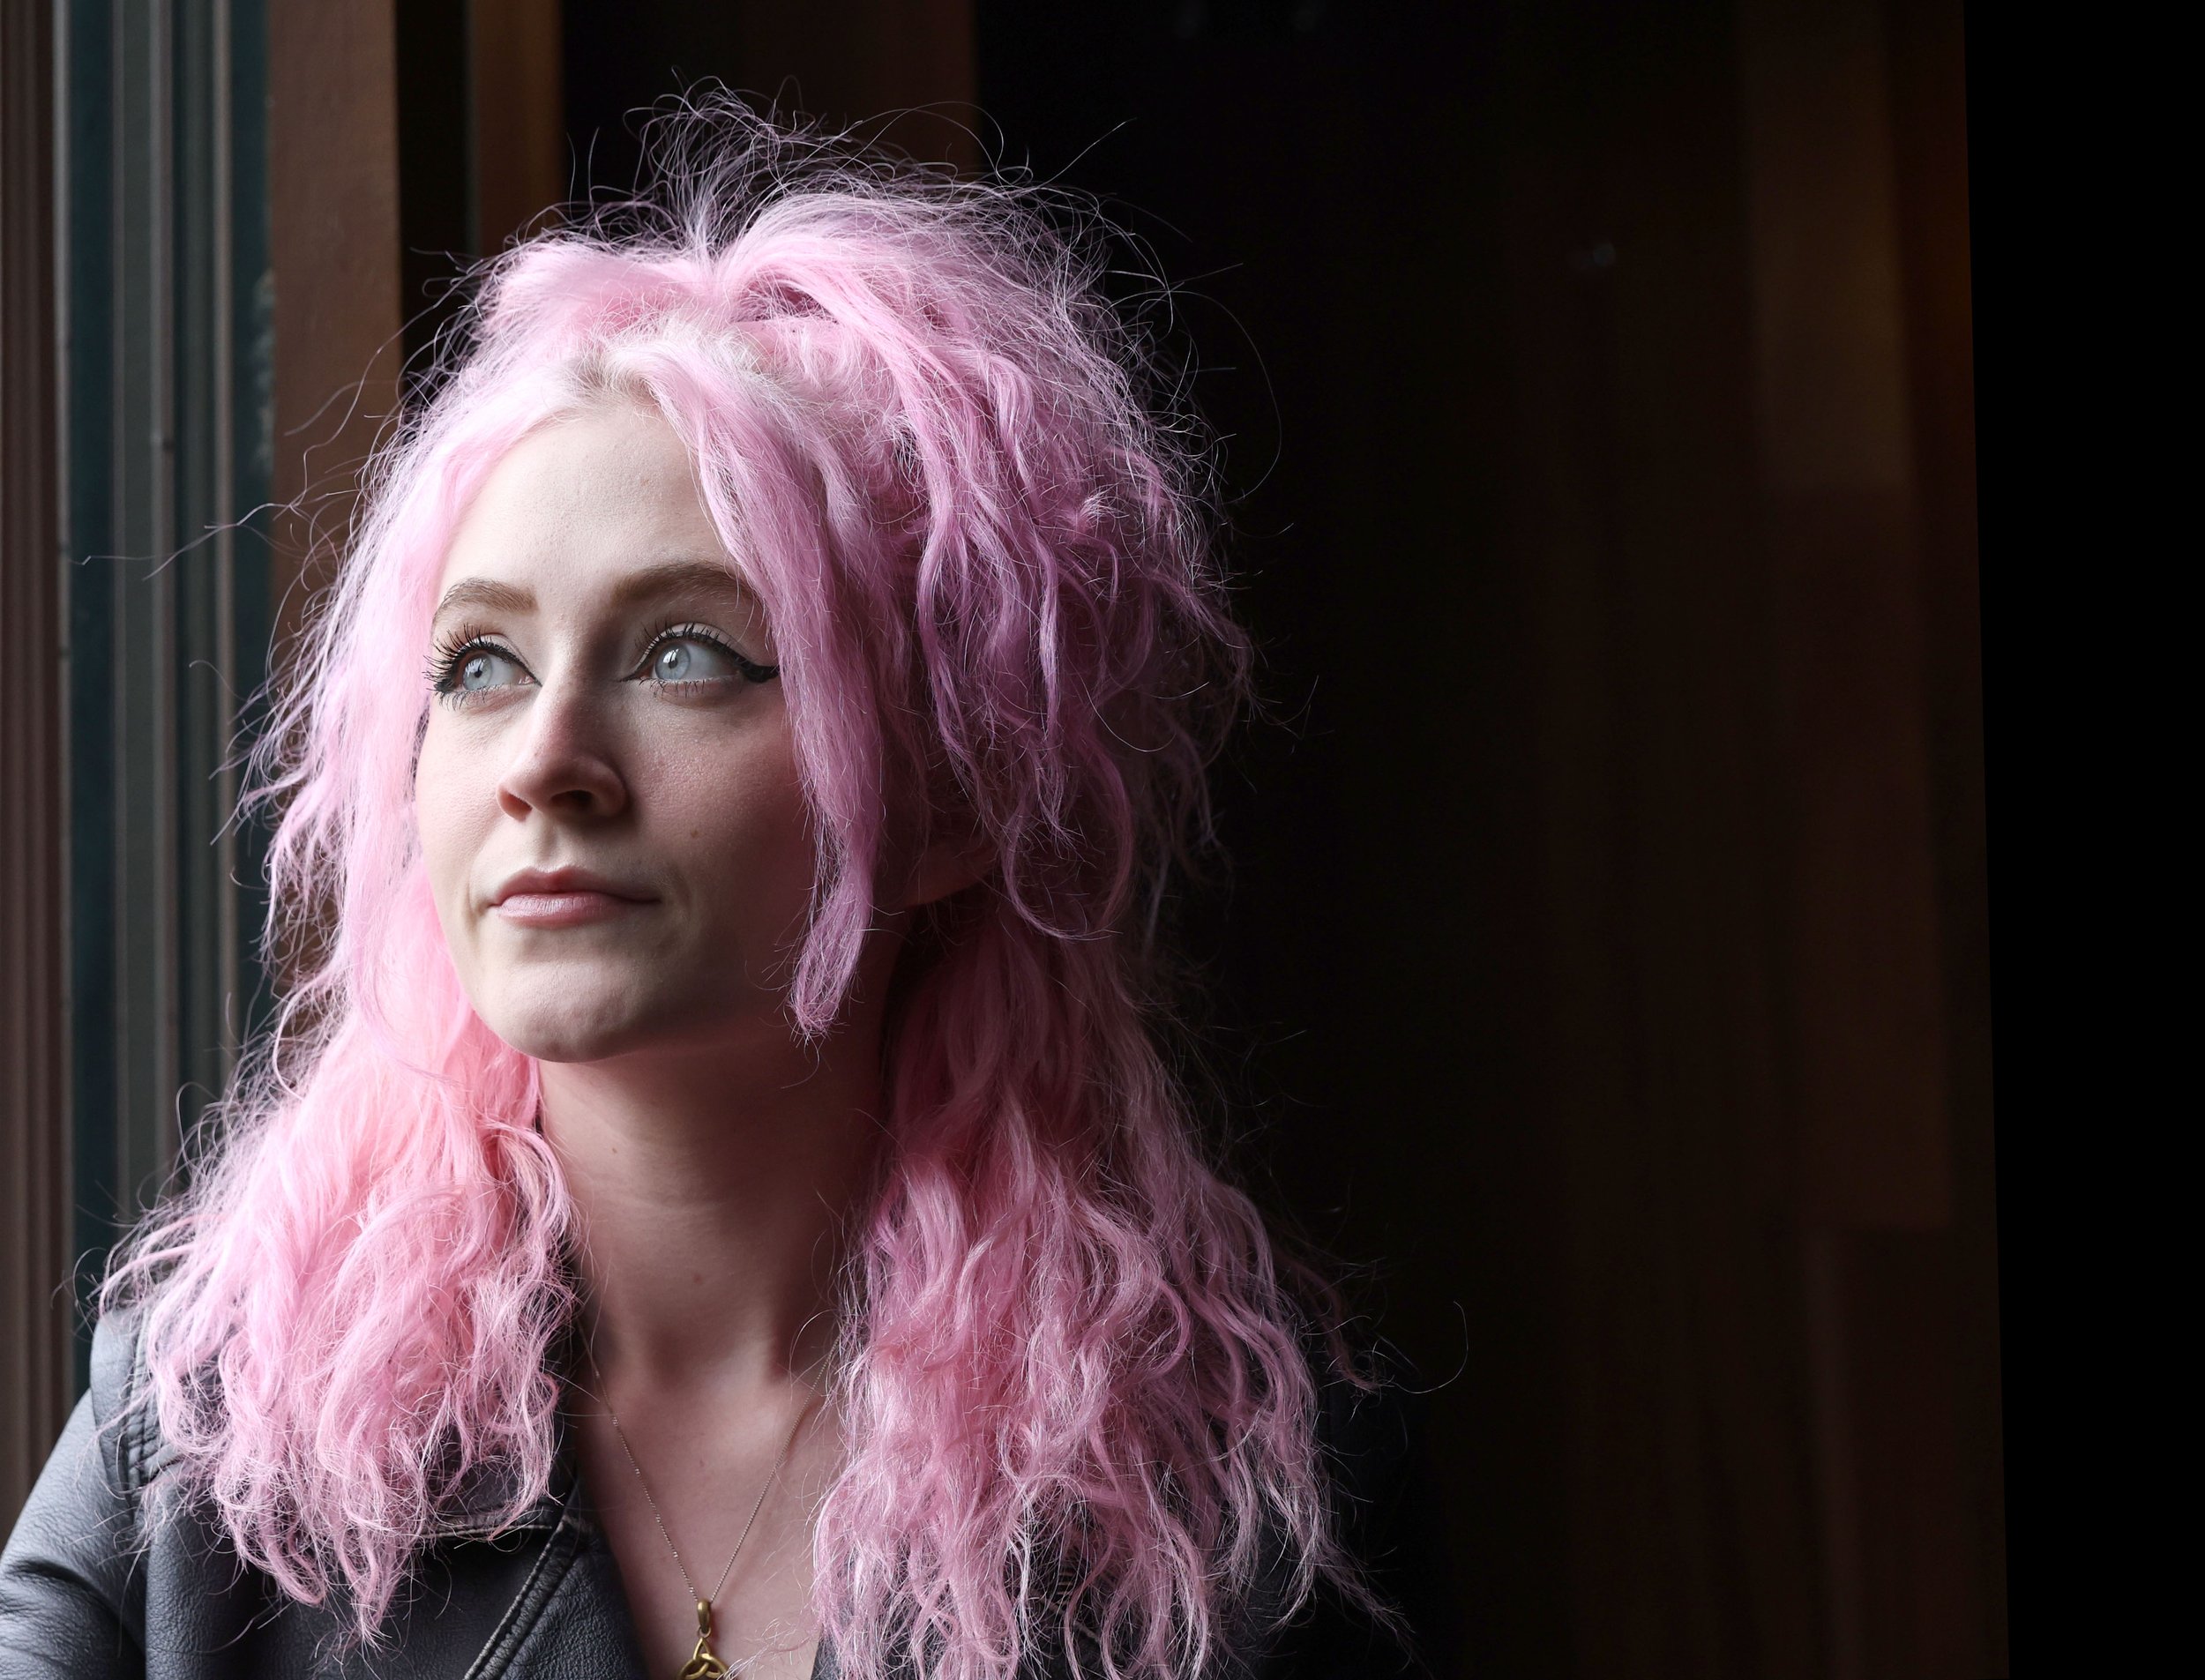 JANET DEVLIN: YOUNG, FEMALE AND ADDICTED